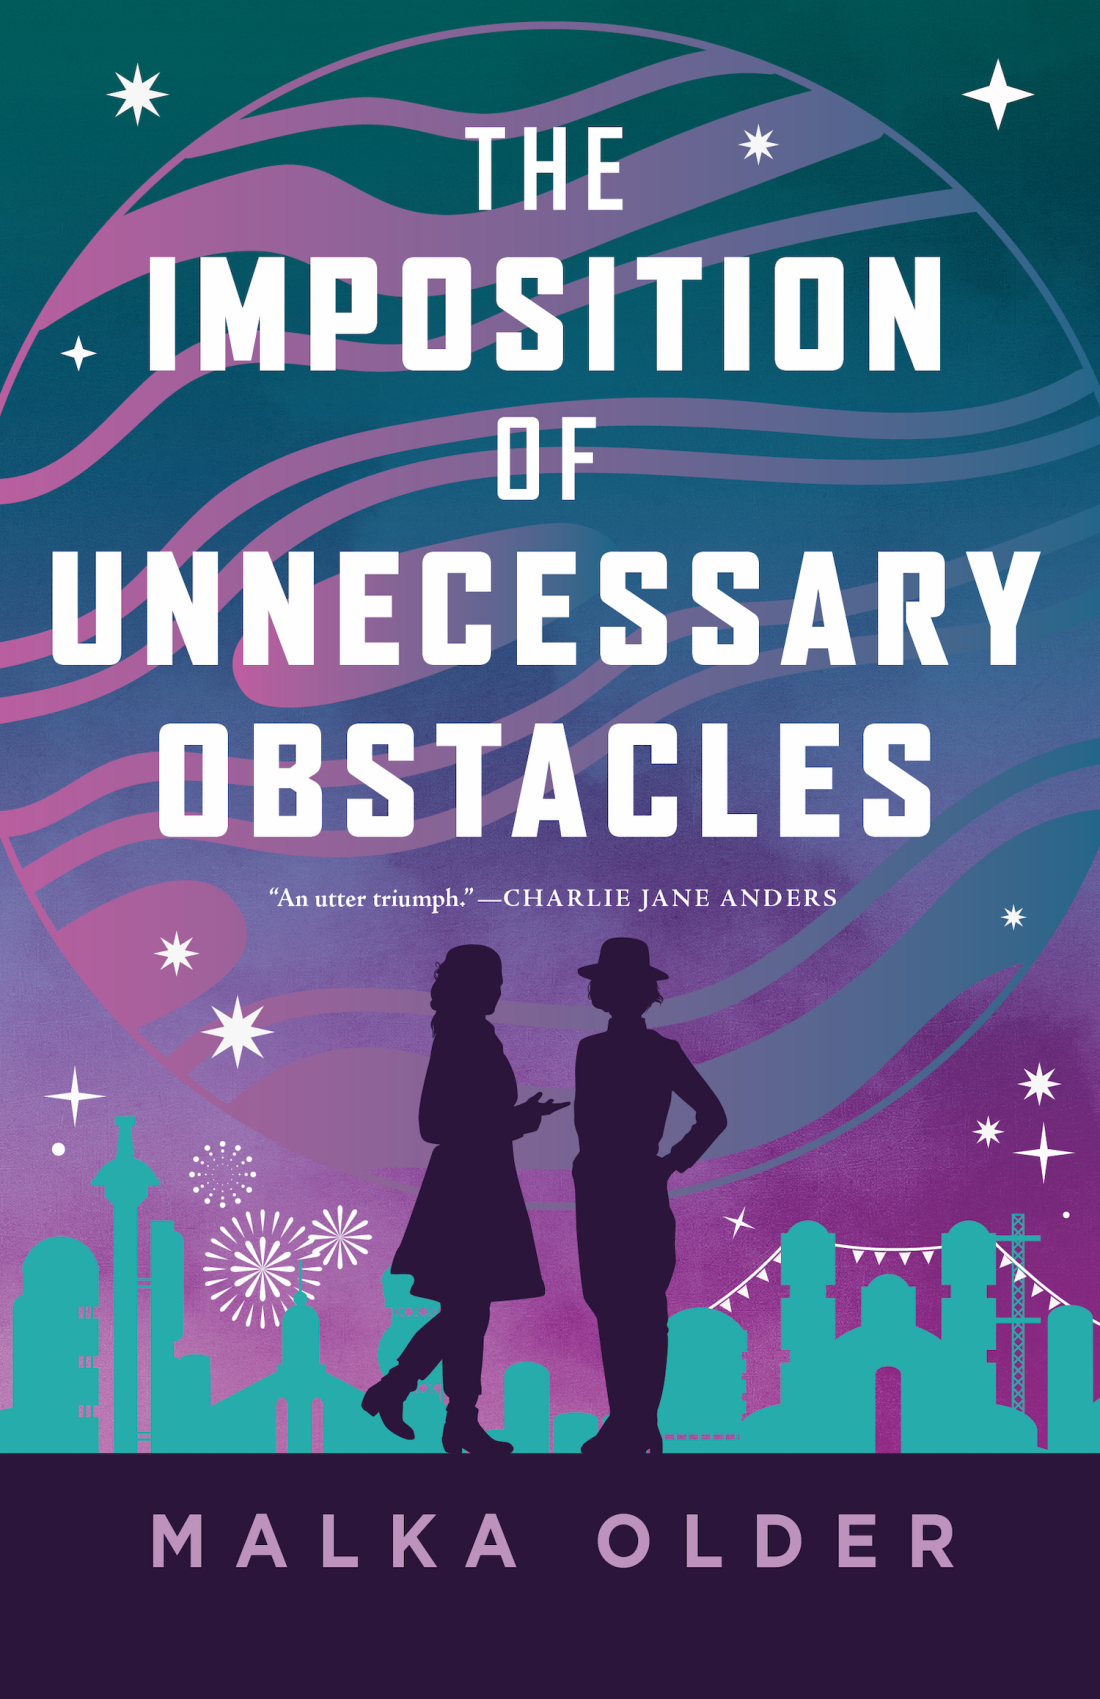 Malka Older: The Imposition of Unnecessary Obstacles (Hardcover, Tordotcom)